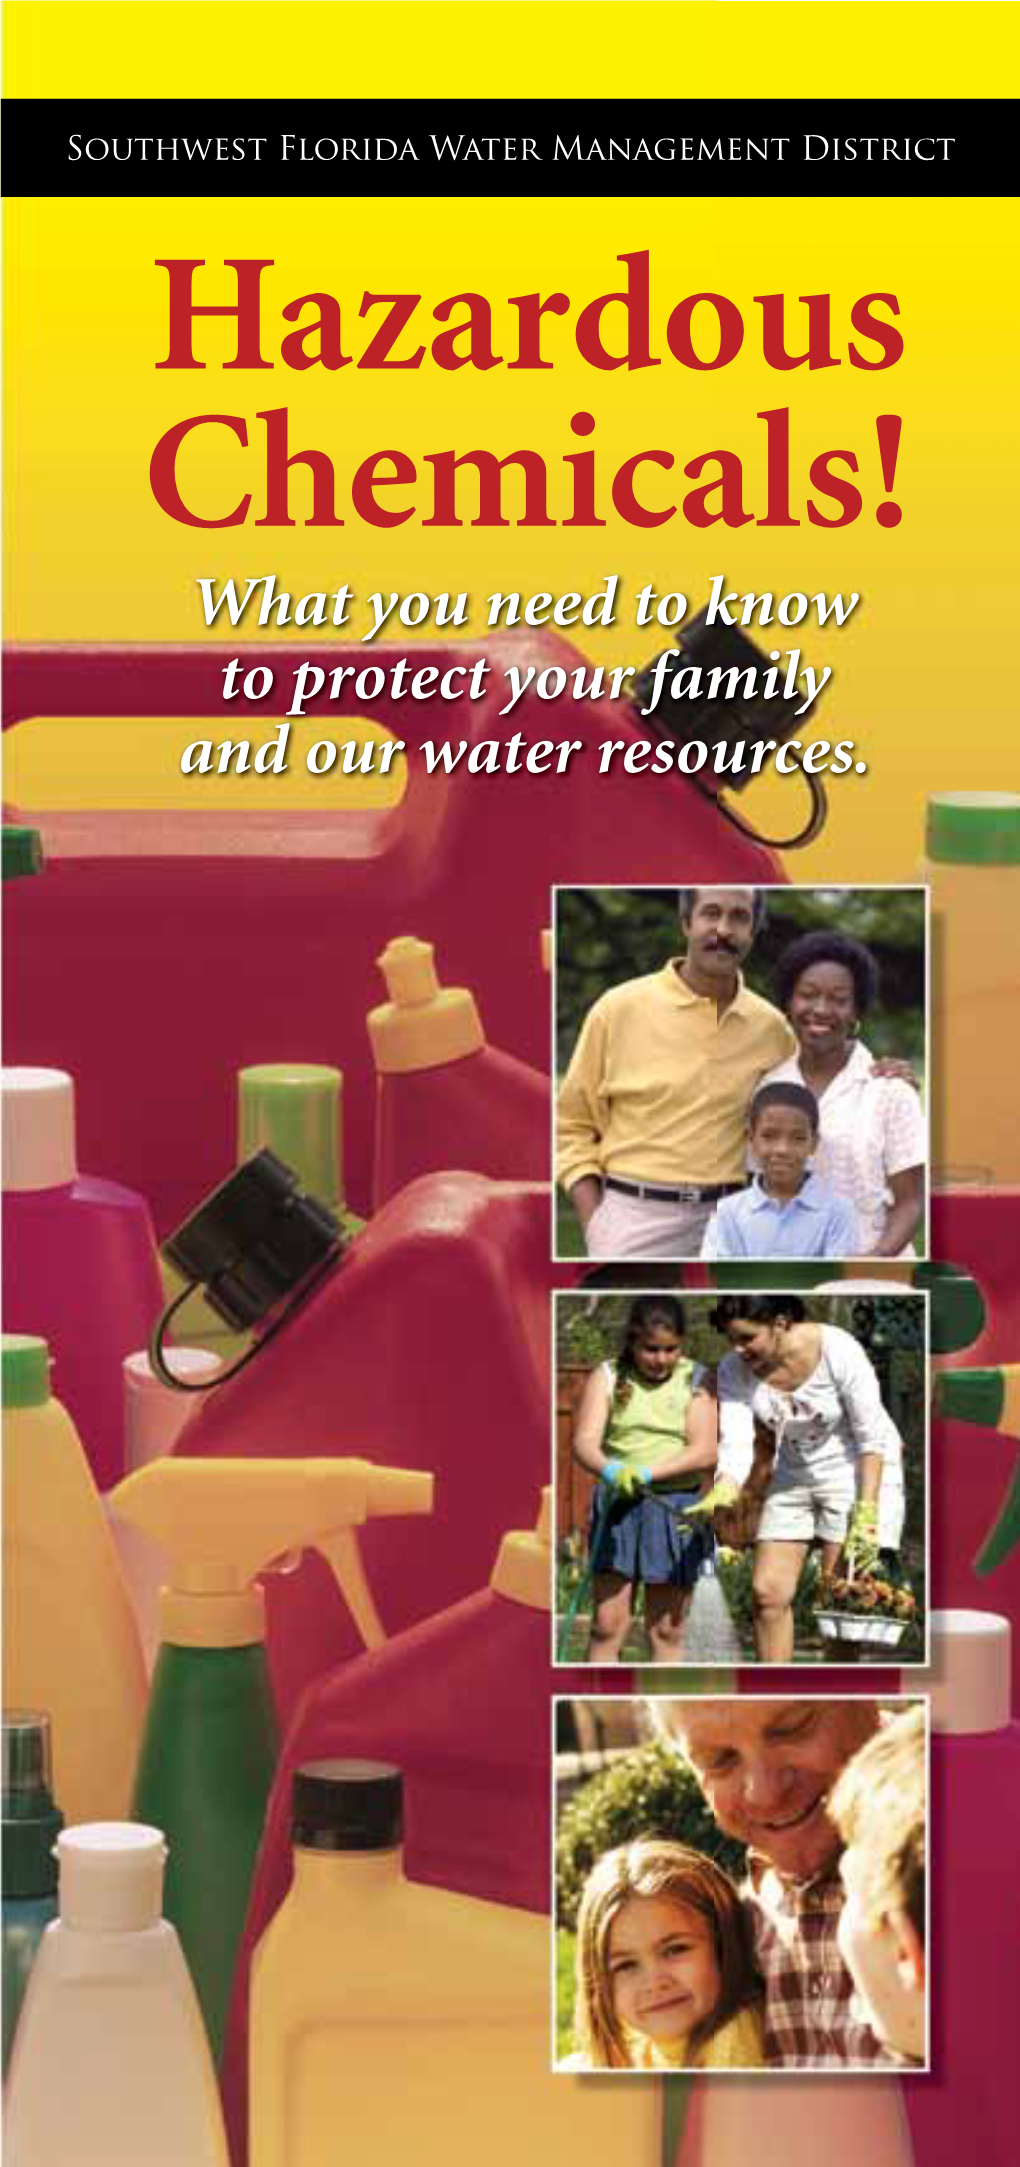 Hazardous Chemicals! What You Need to Know to Protect Your Family and Our Water Resources